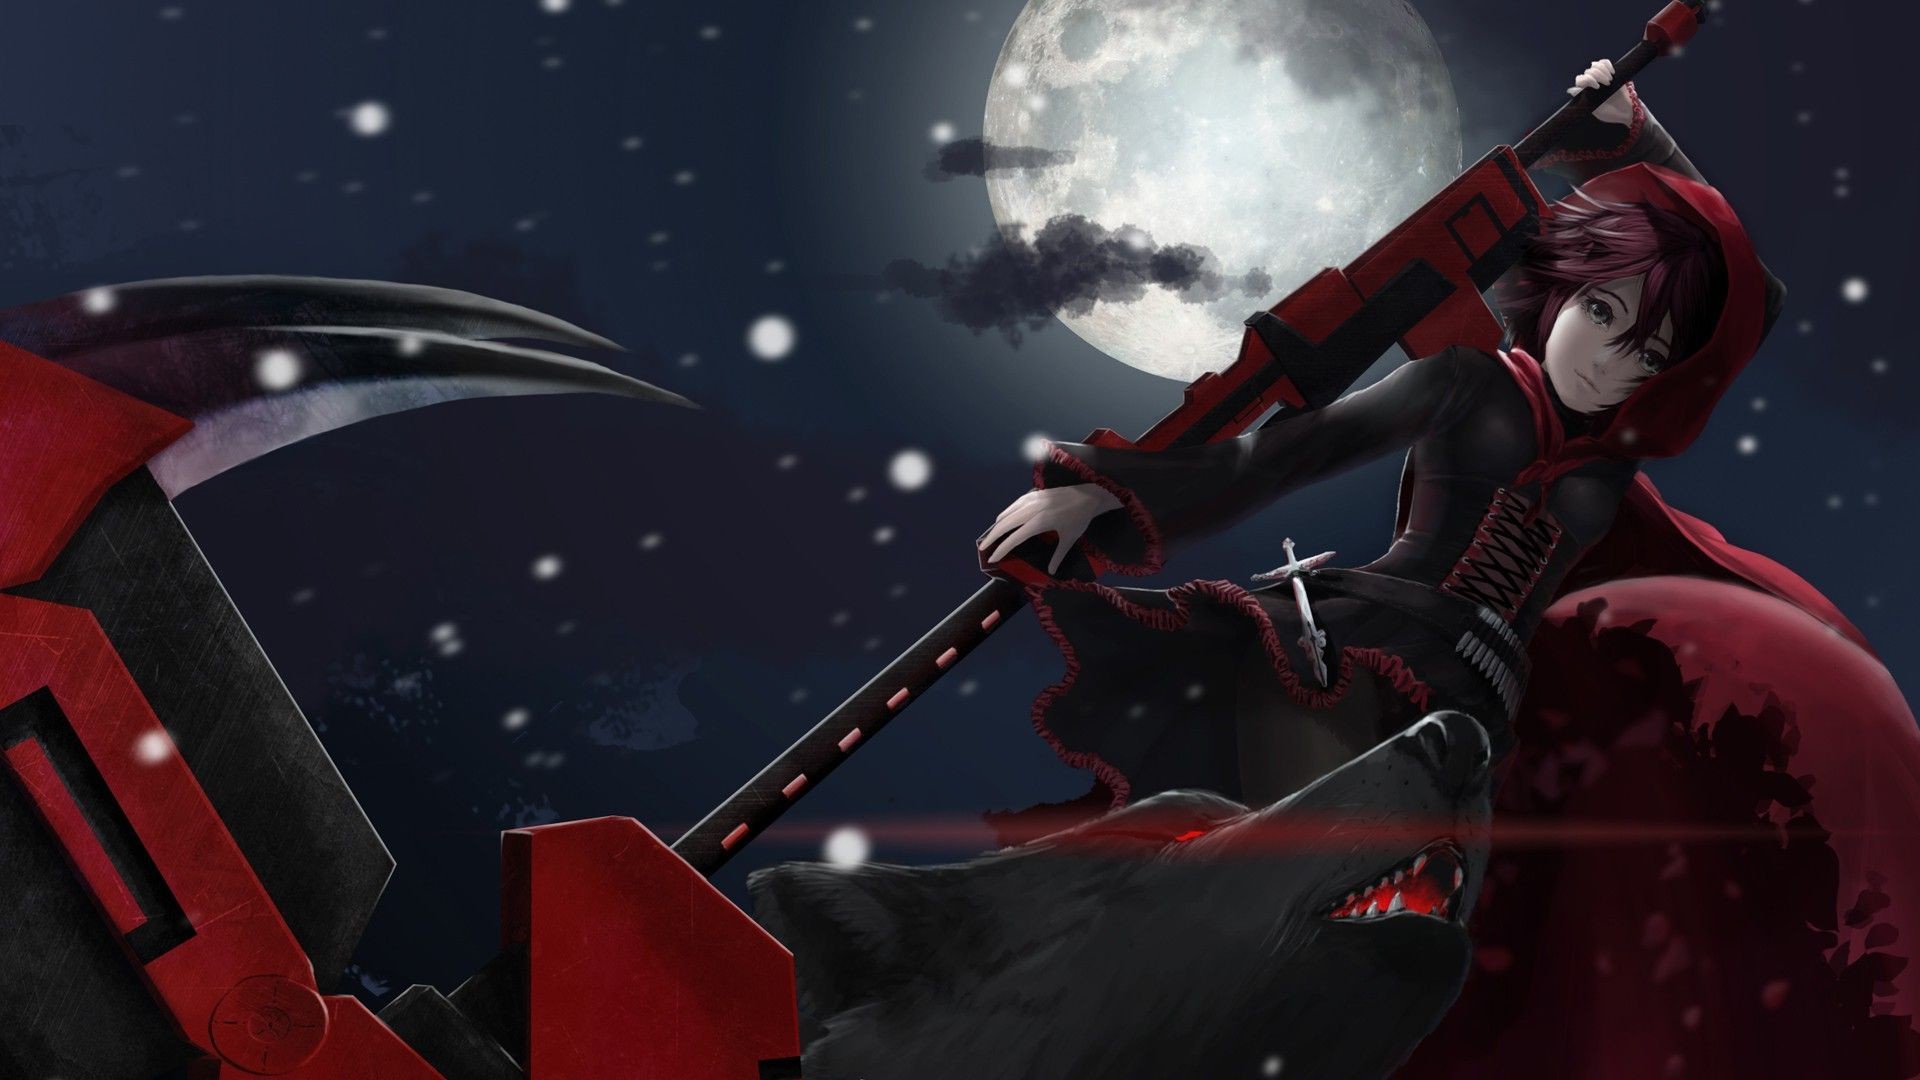 1920x1080 343 RWBY HD Wallpapers | Backgrounds - Wallpaper Abyss - Page 6